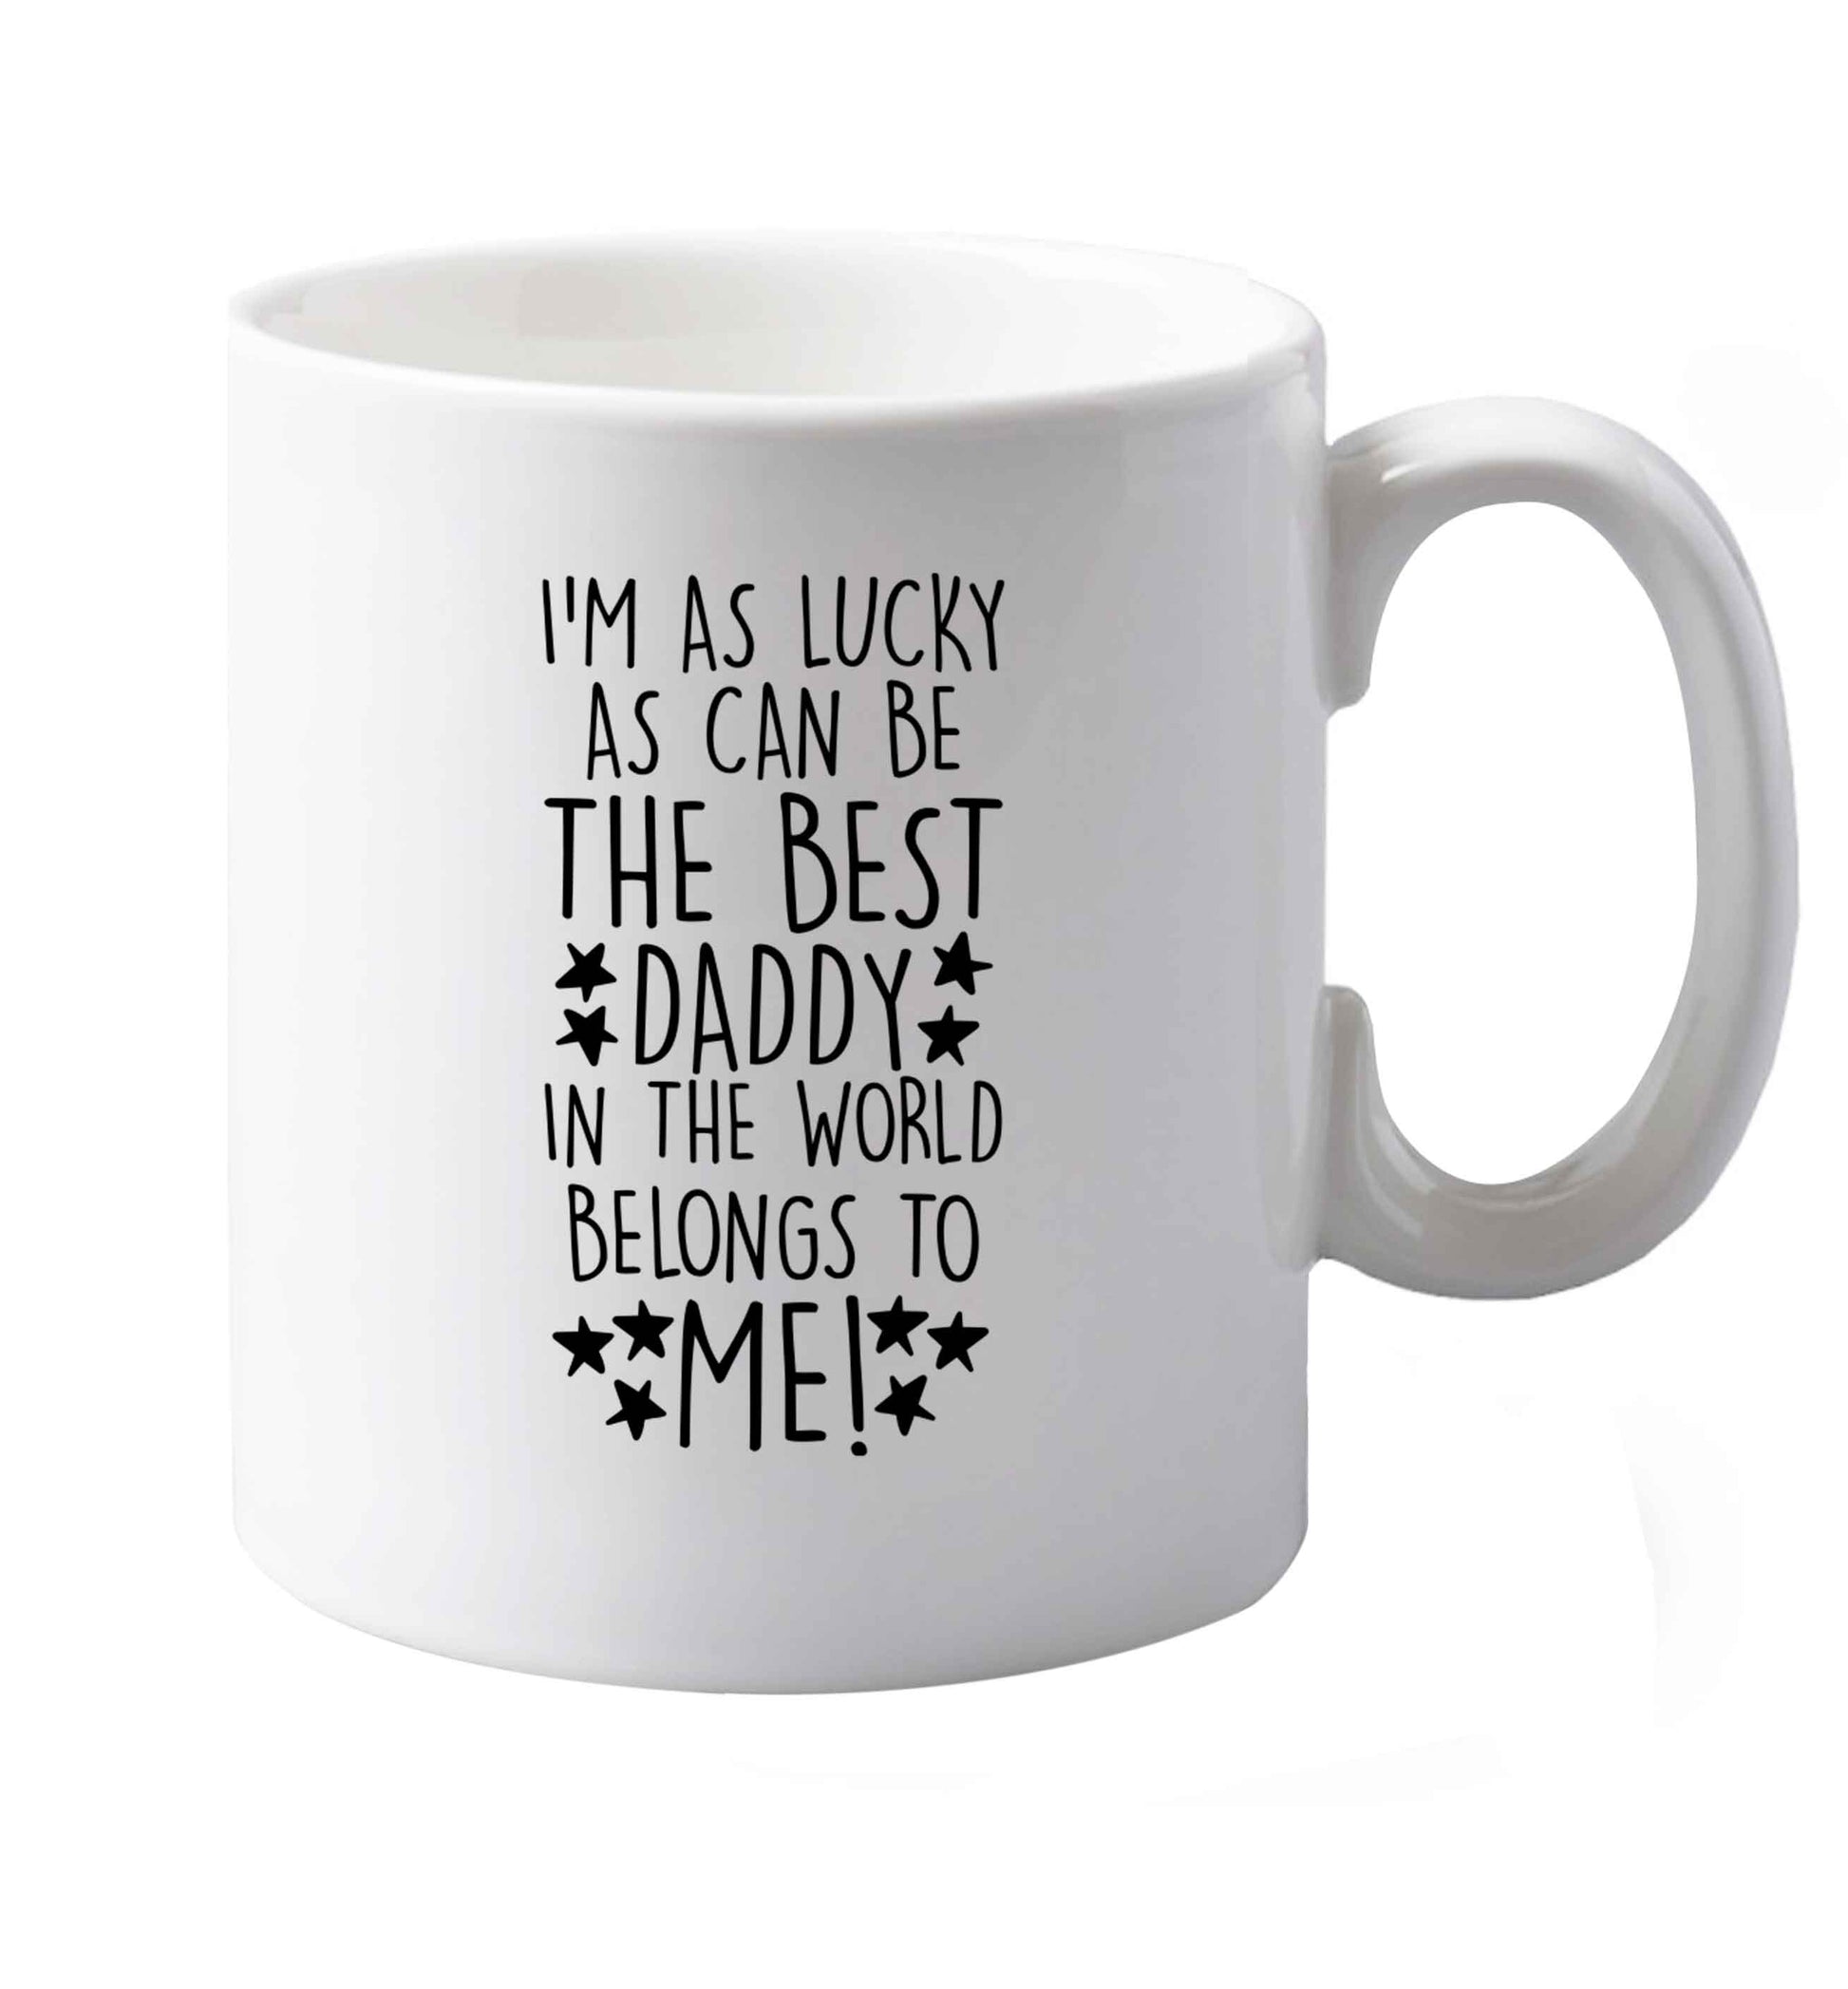 10 oz I'm as lucky as can be the worlds greatest dad belongs to me! ceramic mug both sides